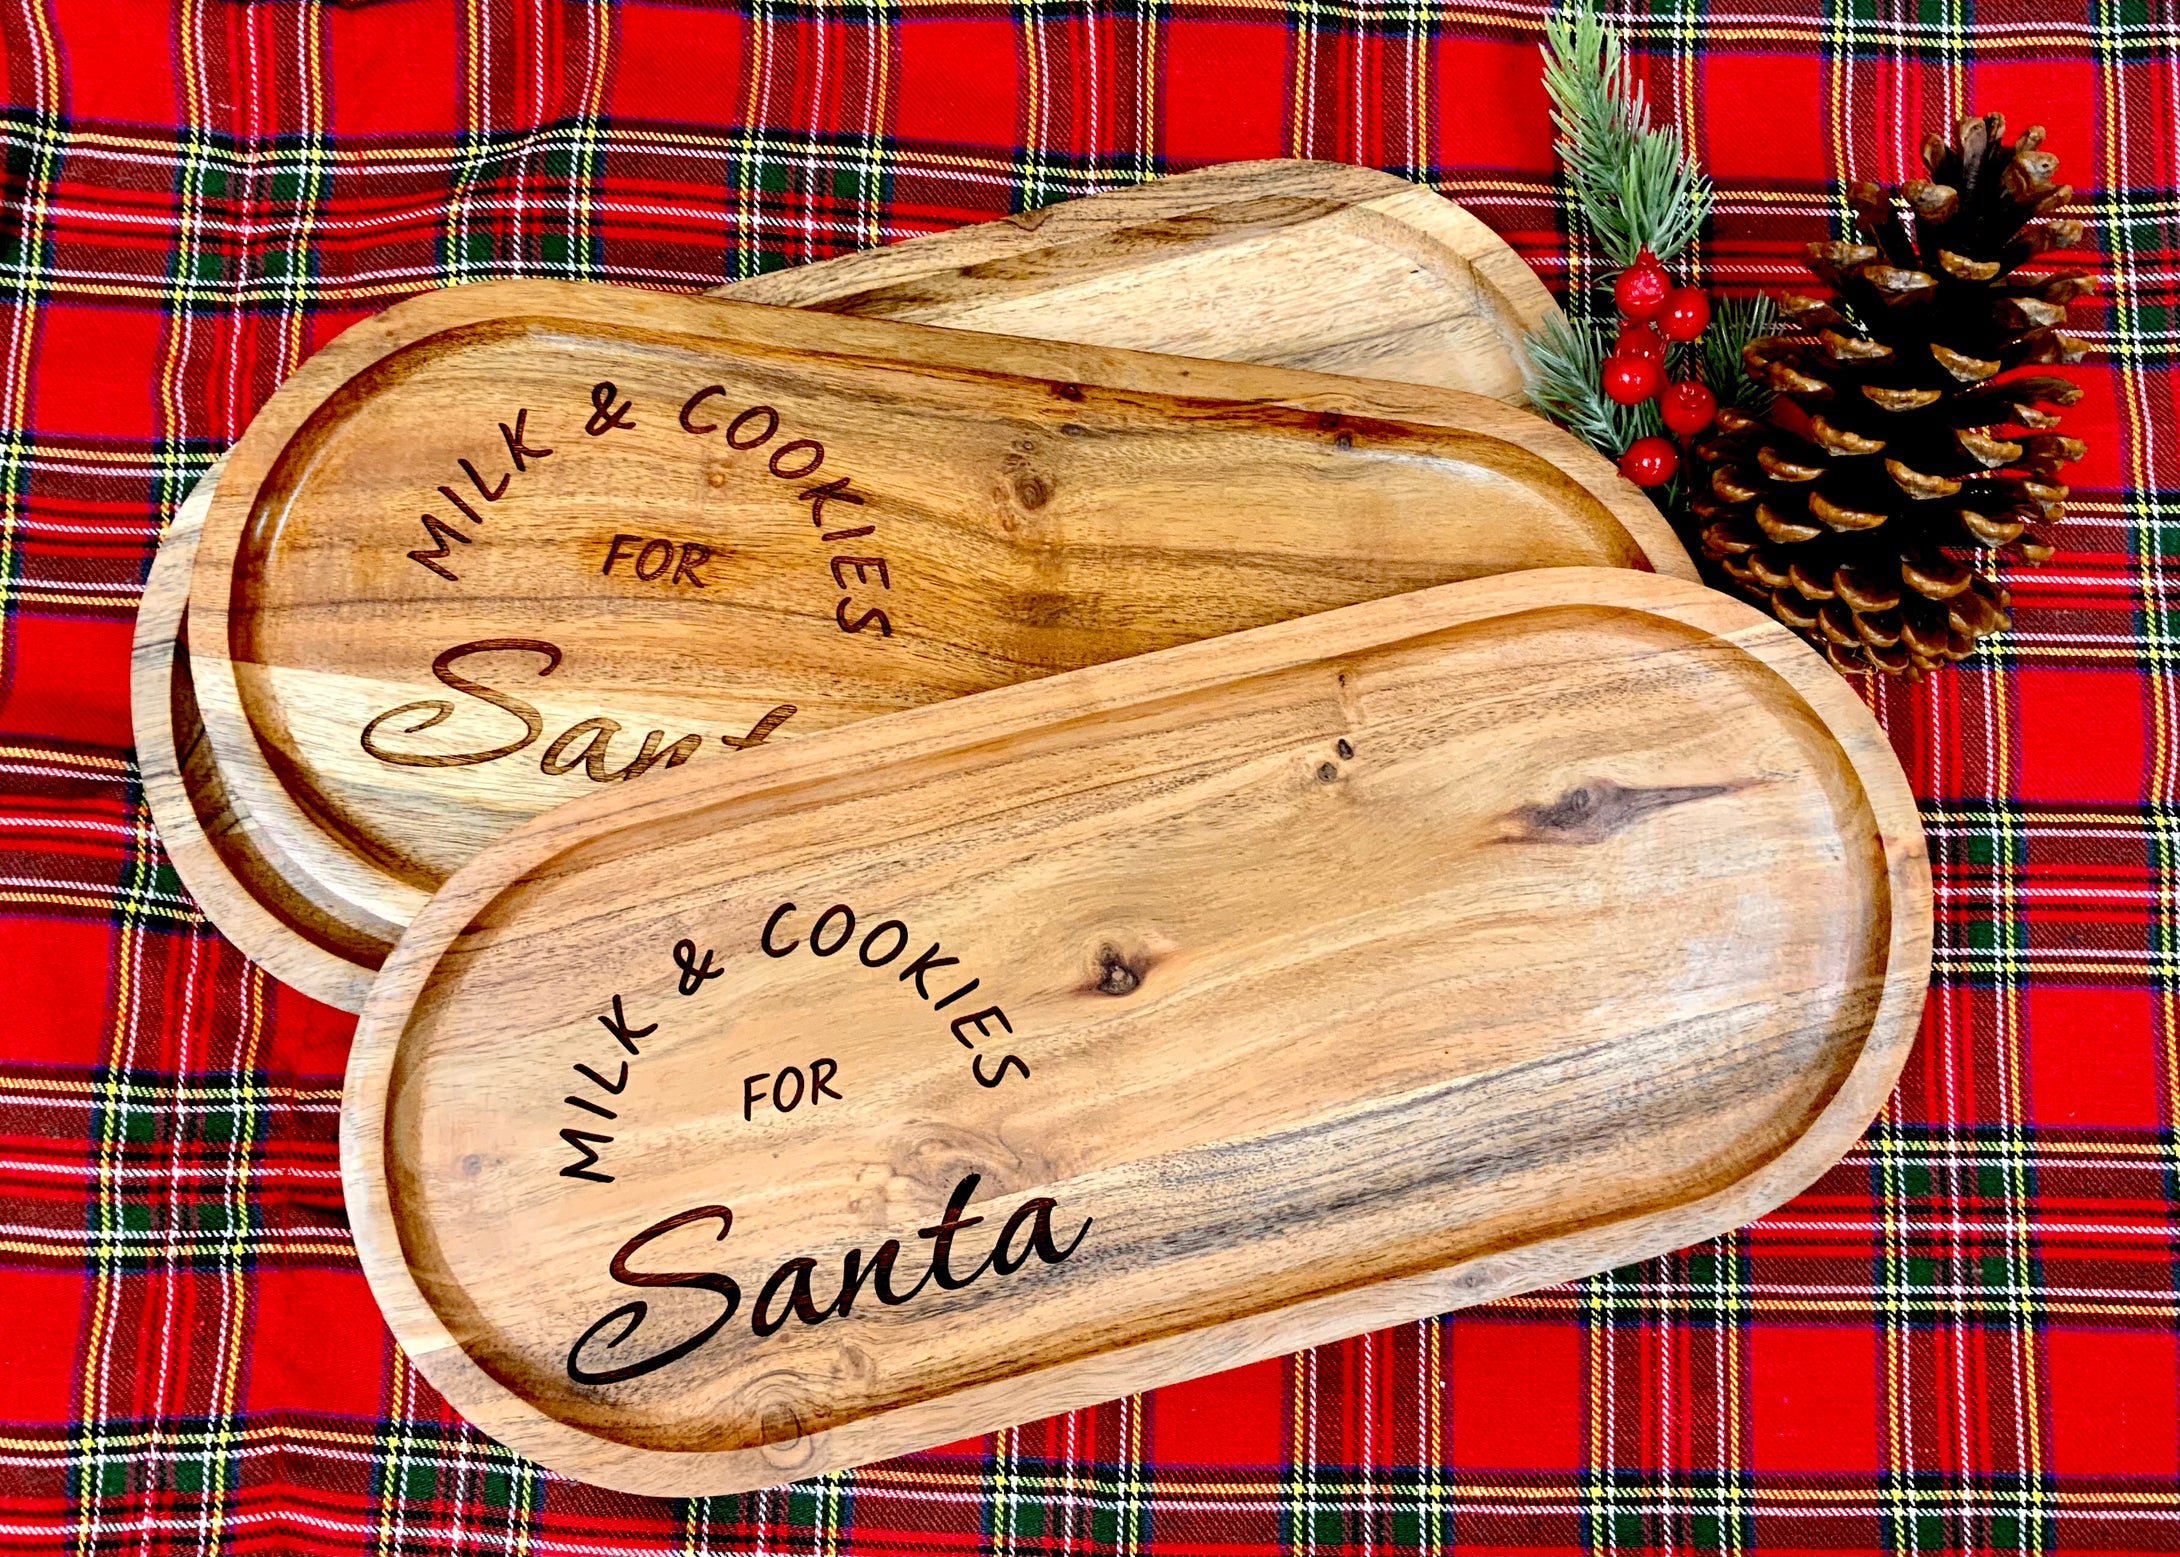 Santa Trays for Milk and Cookies